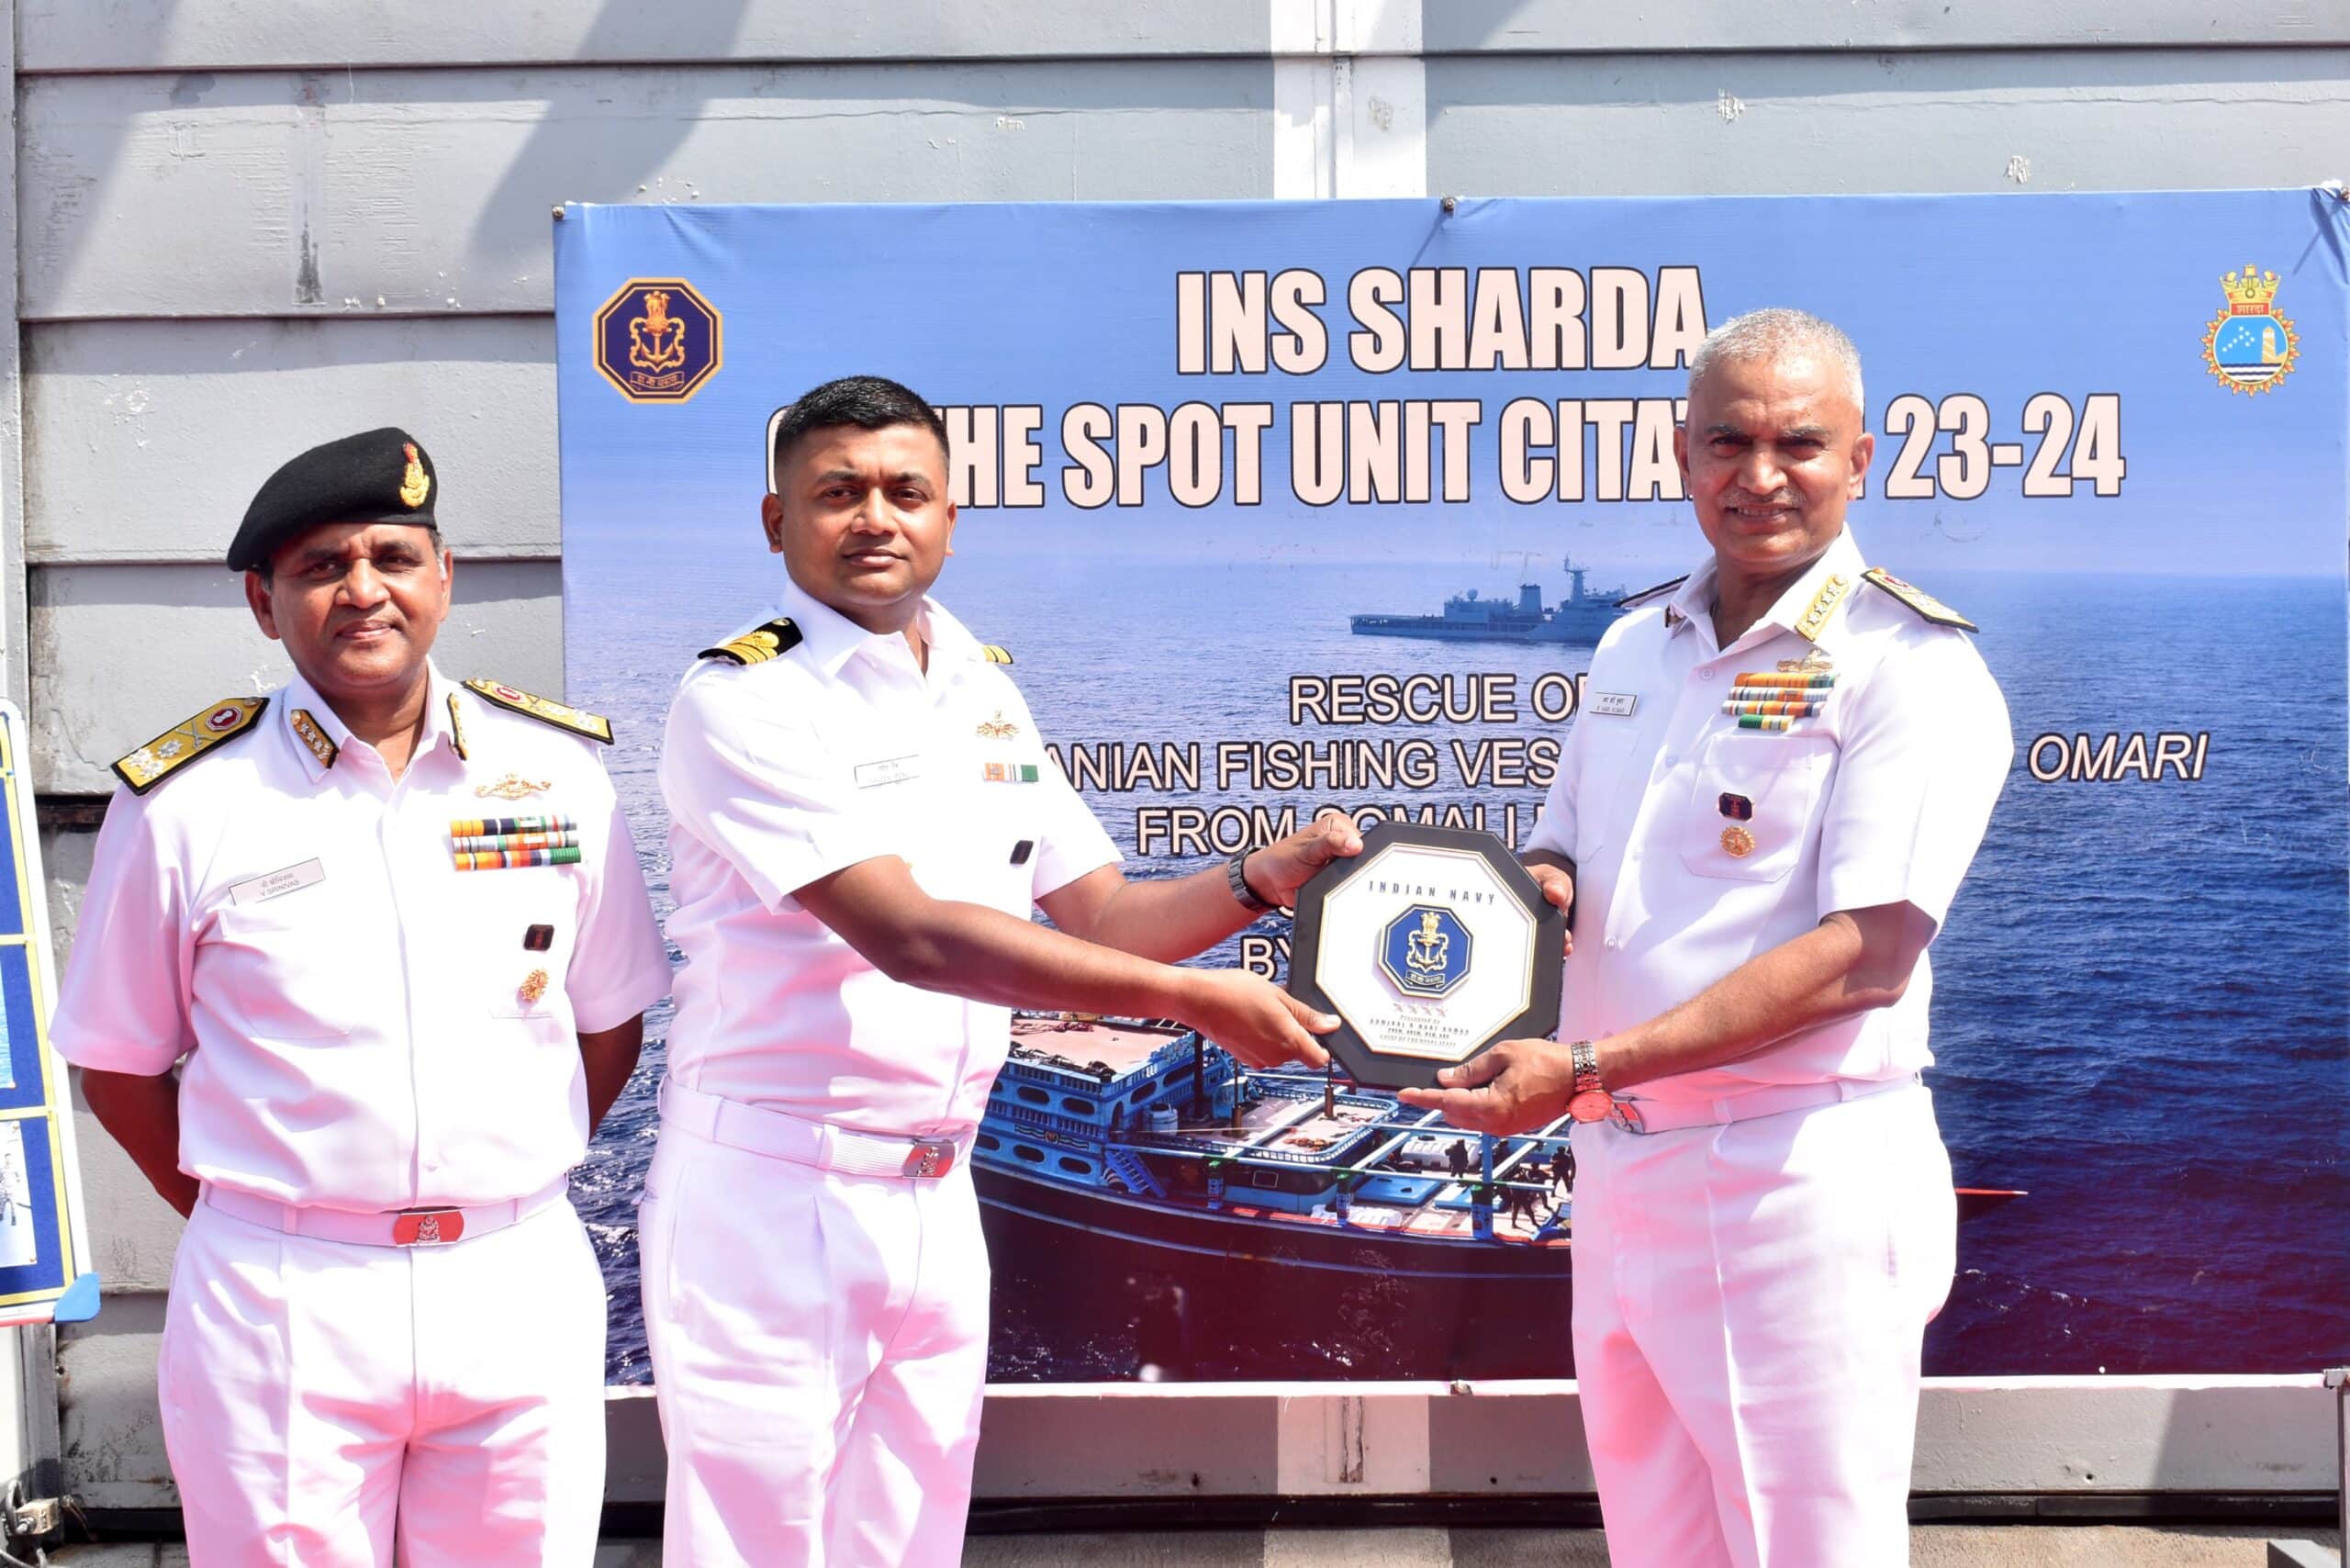 Indian Navy as the preferred security partner in the region